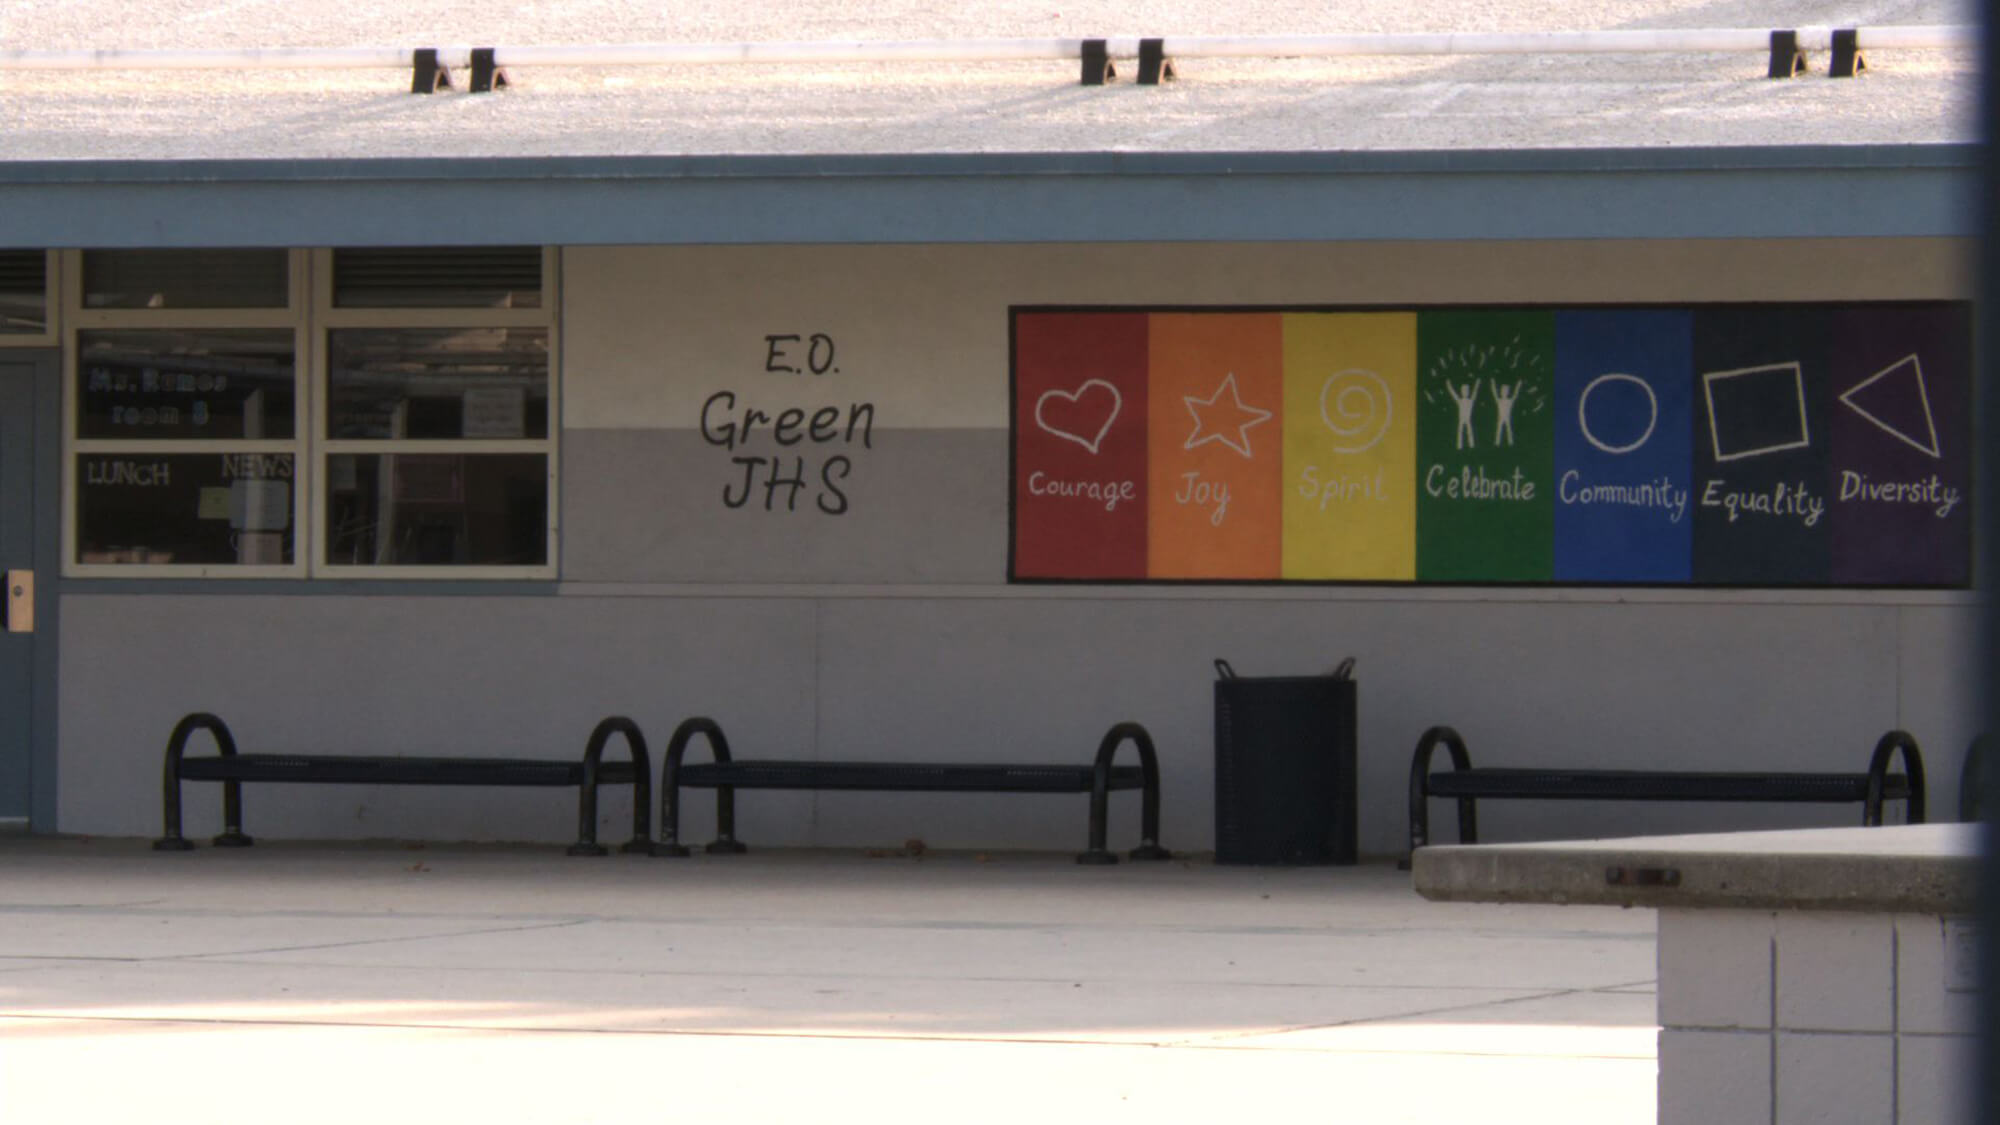 Still from Valentine Road. A building with a window and, text saying, "E.O. Green JHS", and a board displaying a rainbow of colored sections, symbols, and words such as, "courage", "joy", "celebrate", "community", etc.